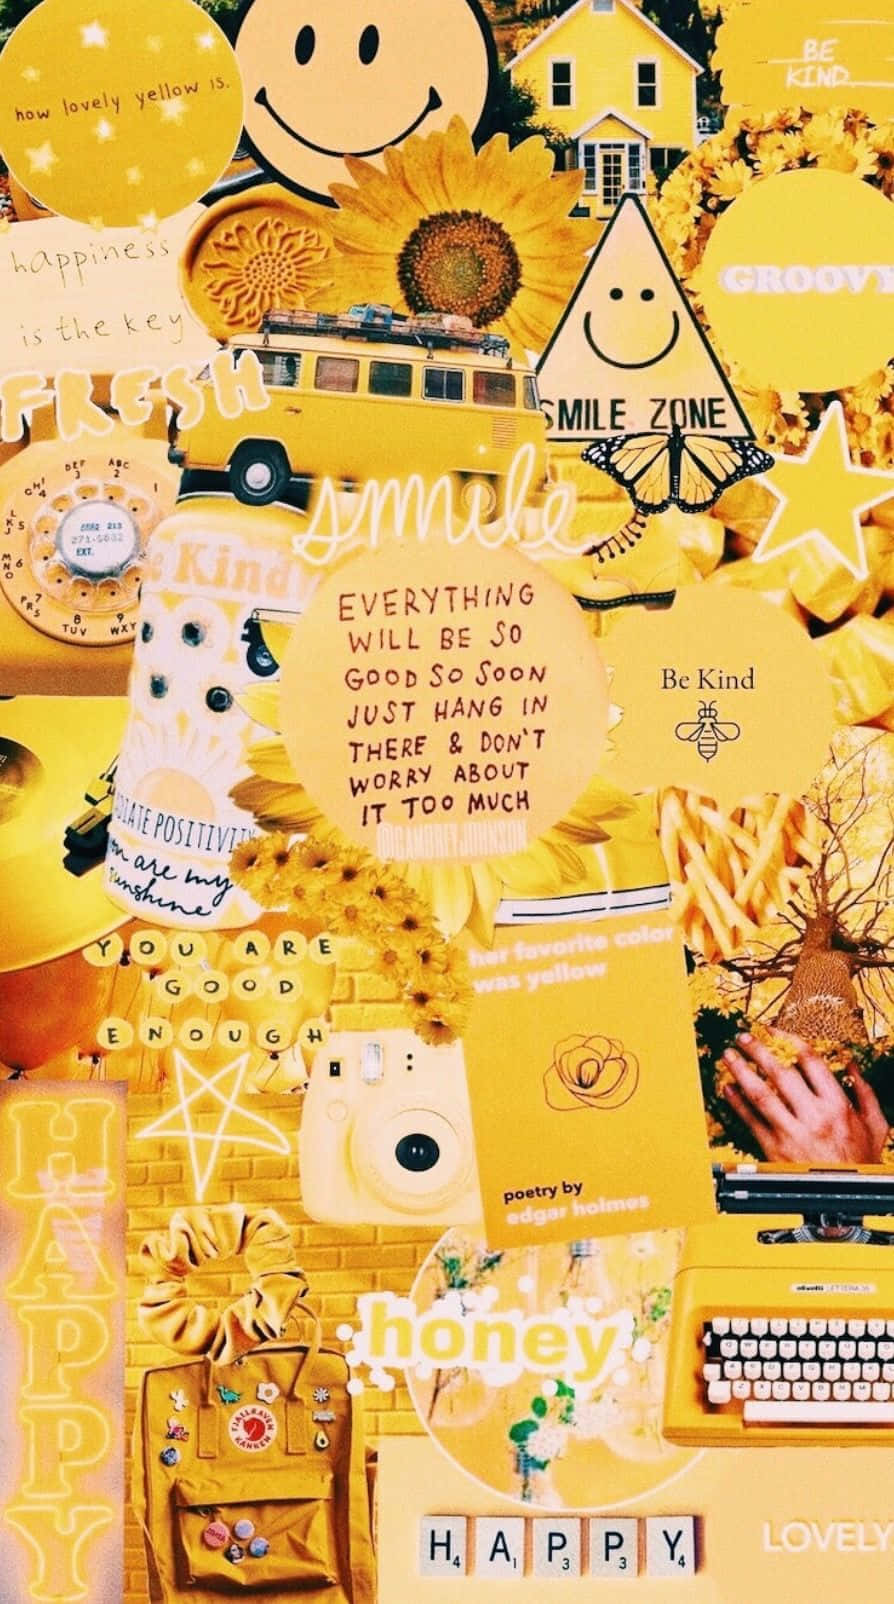 Quotes And Smileys In Yellow Aesthetic Iphone